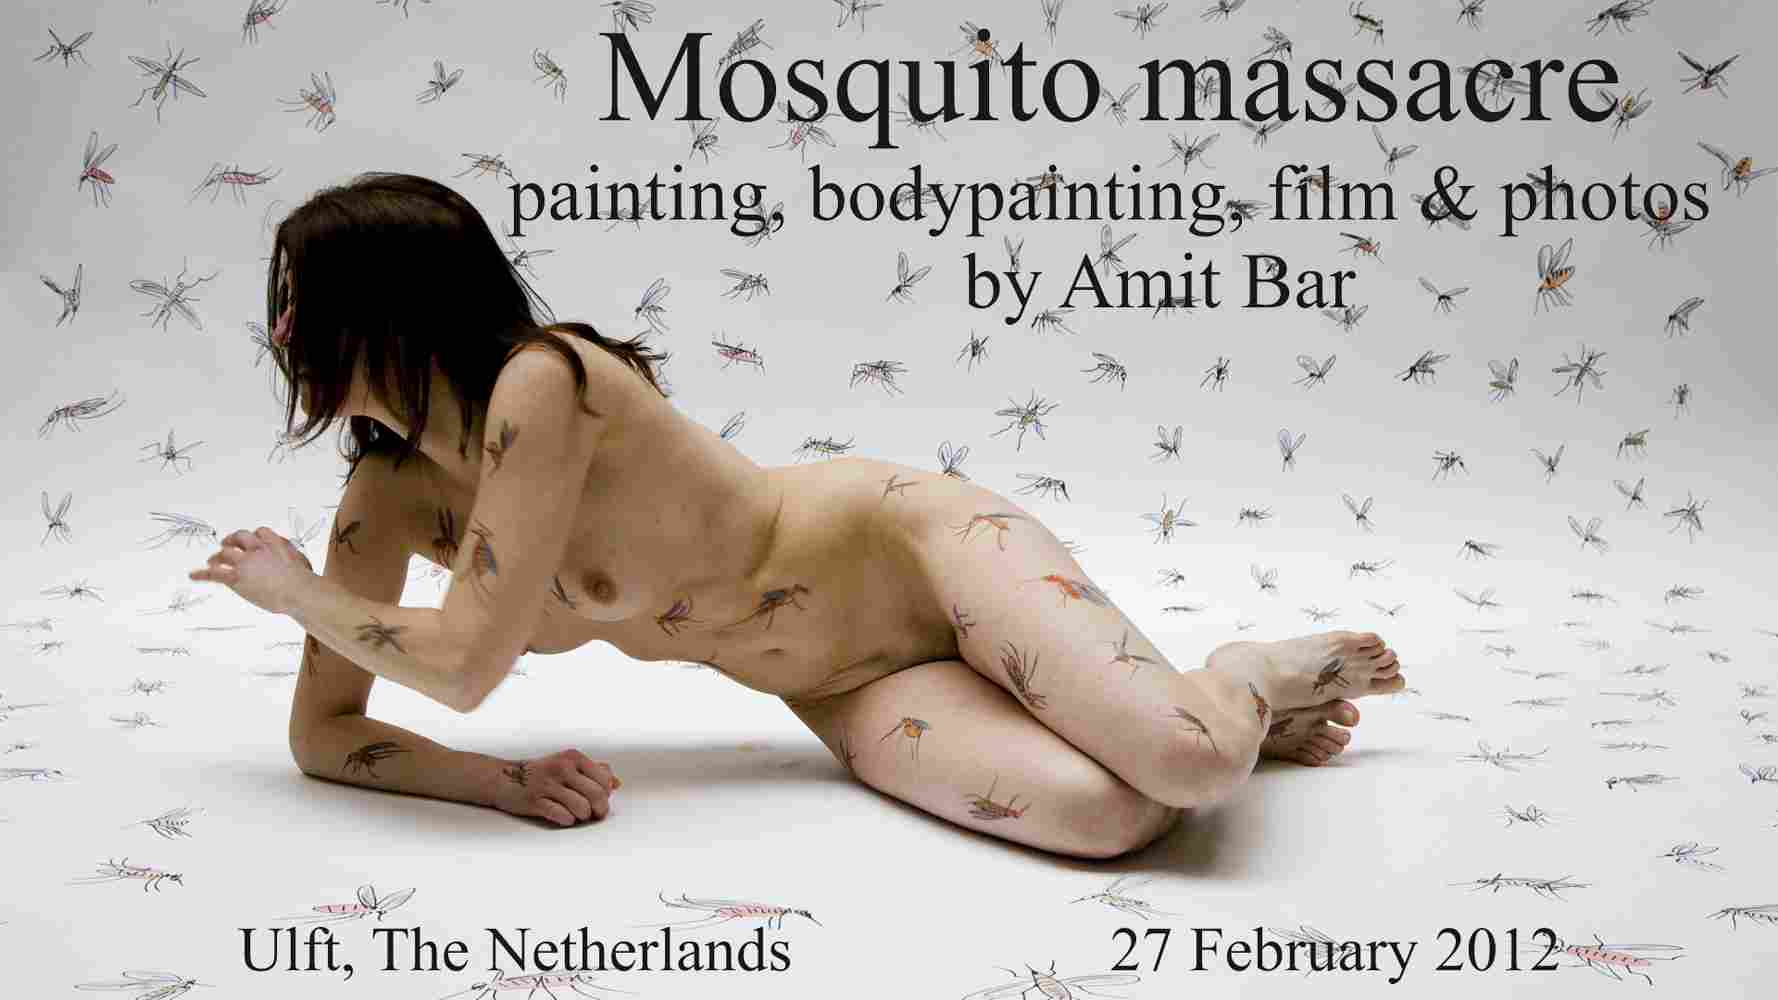 Mosquito massacre video: A side-jump from my project "Humans with Animals", I now put the mark on mosquitoes, who are may be the most hated animals that exist. No wonder - they drink our blood and transfer diseases...
Who likes mosquitoes? Only fish, frogs and birds, and they eat them too!   